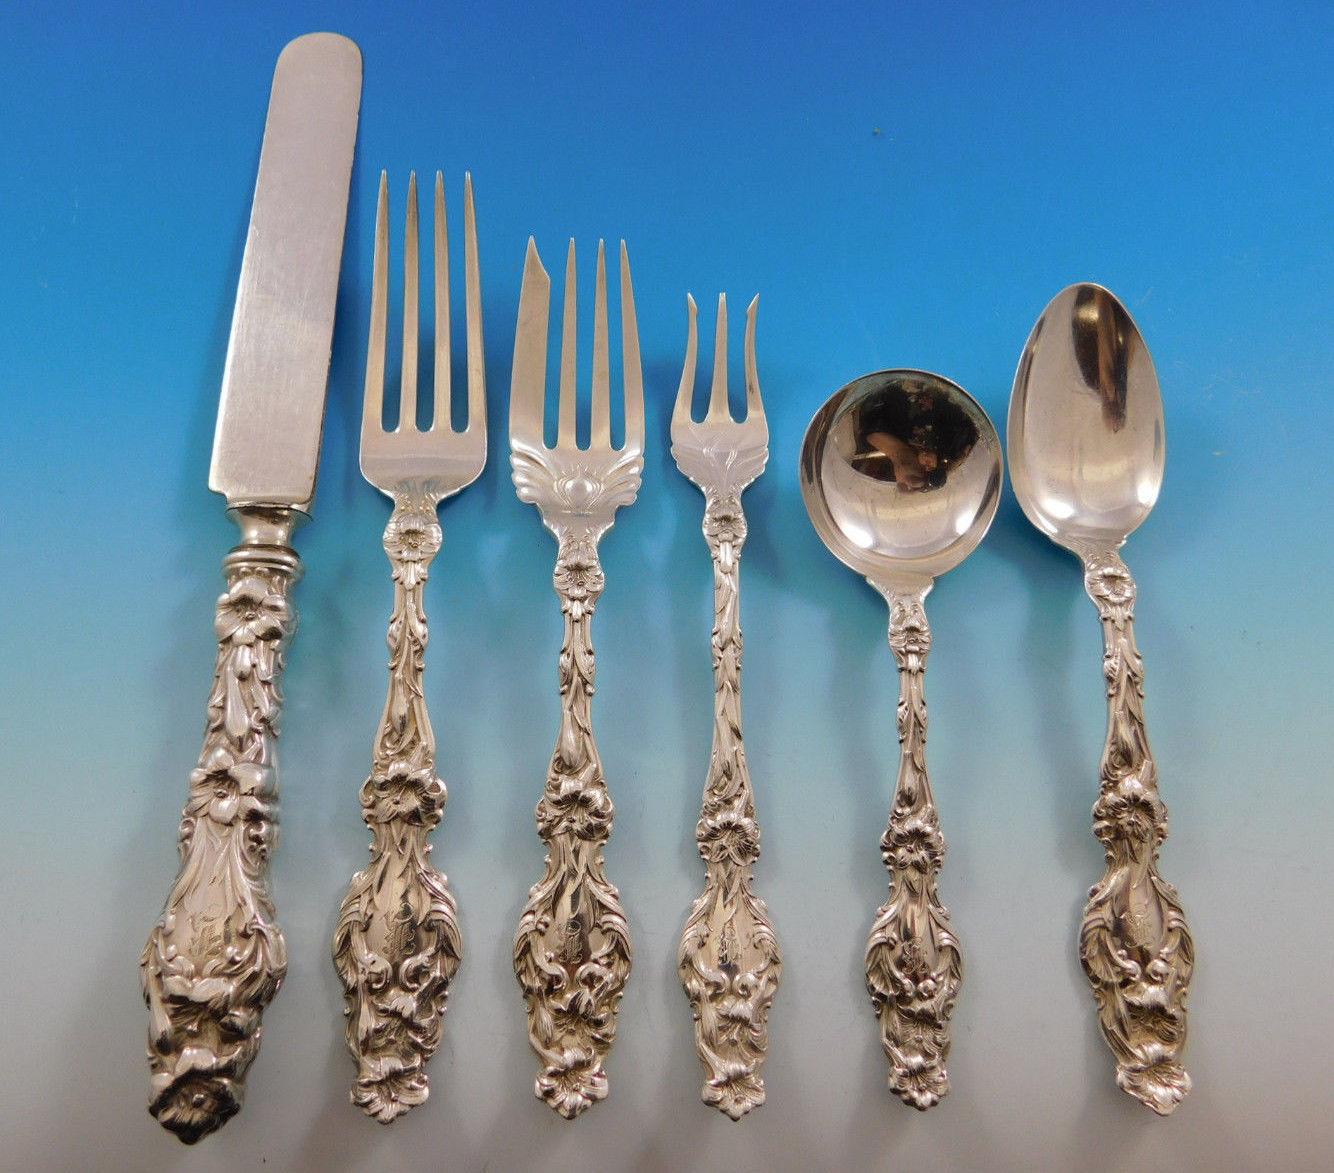 Lily by Whiting sterling silver flatware set, 70 pieces. This set includes:

12 knives, blunt blades, 9